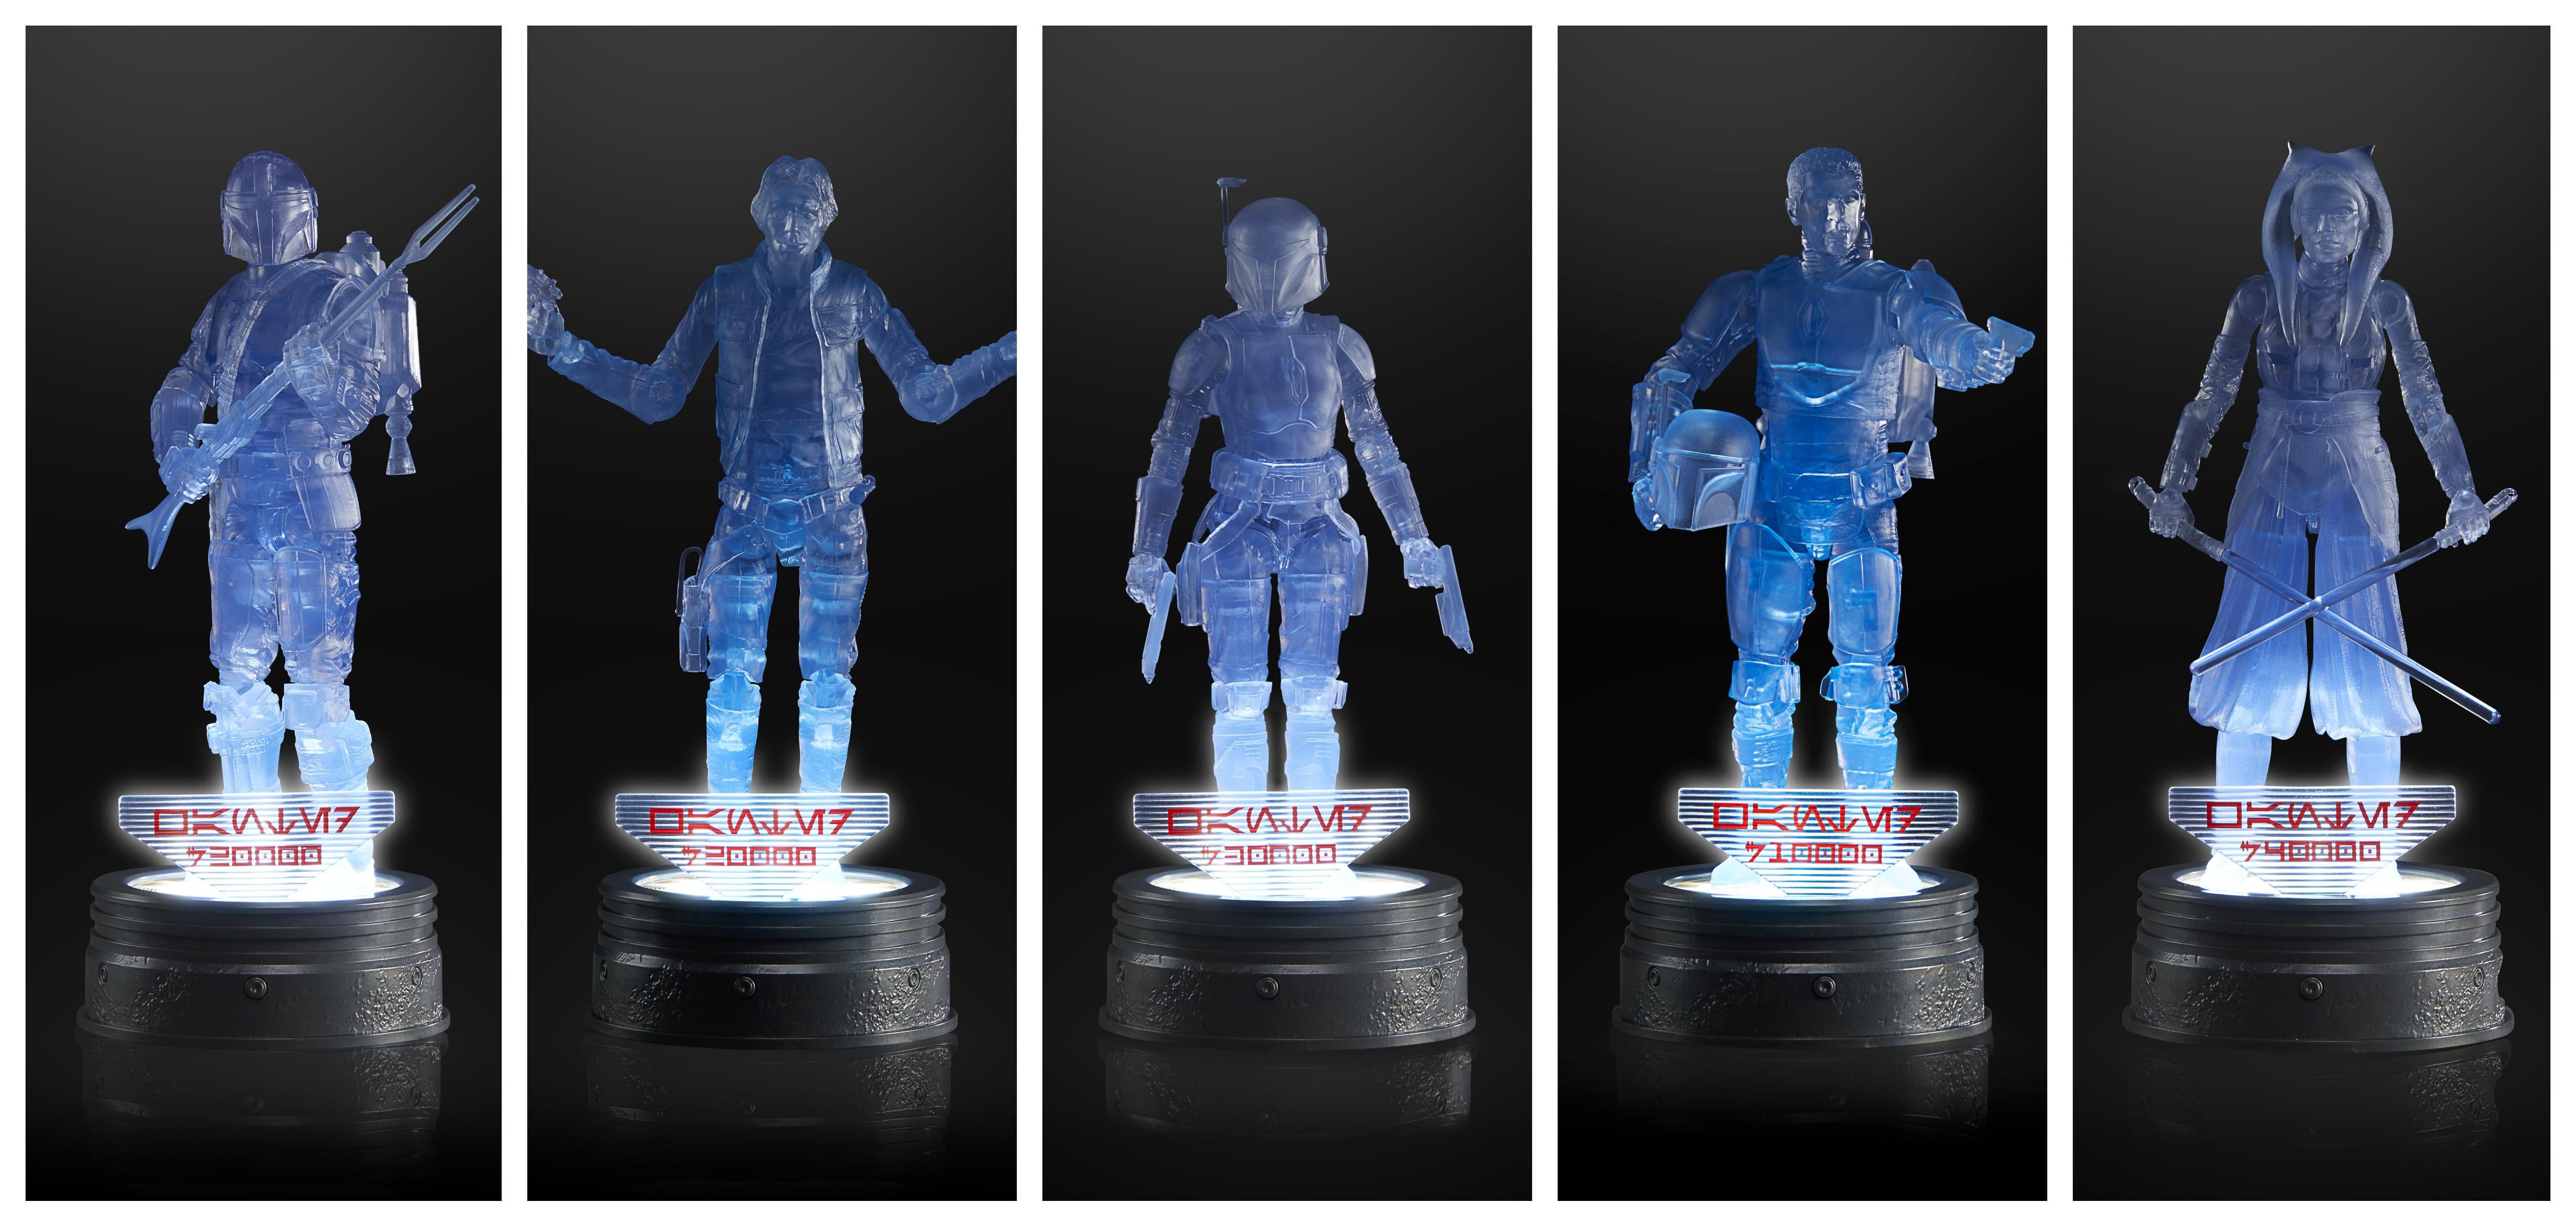 The First Star Wars Black Series Holocomm Collection Figures Are On Sale Now